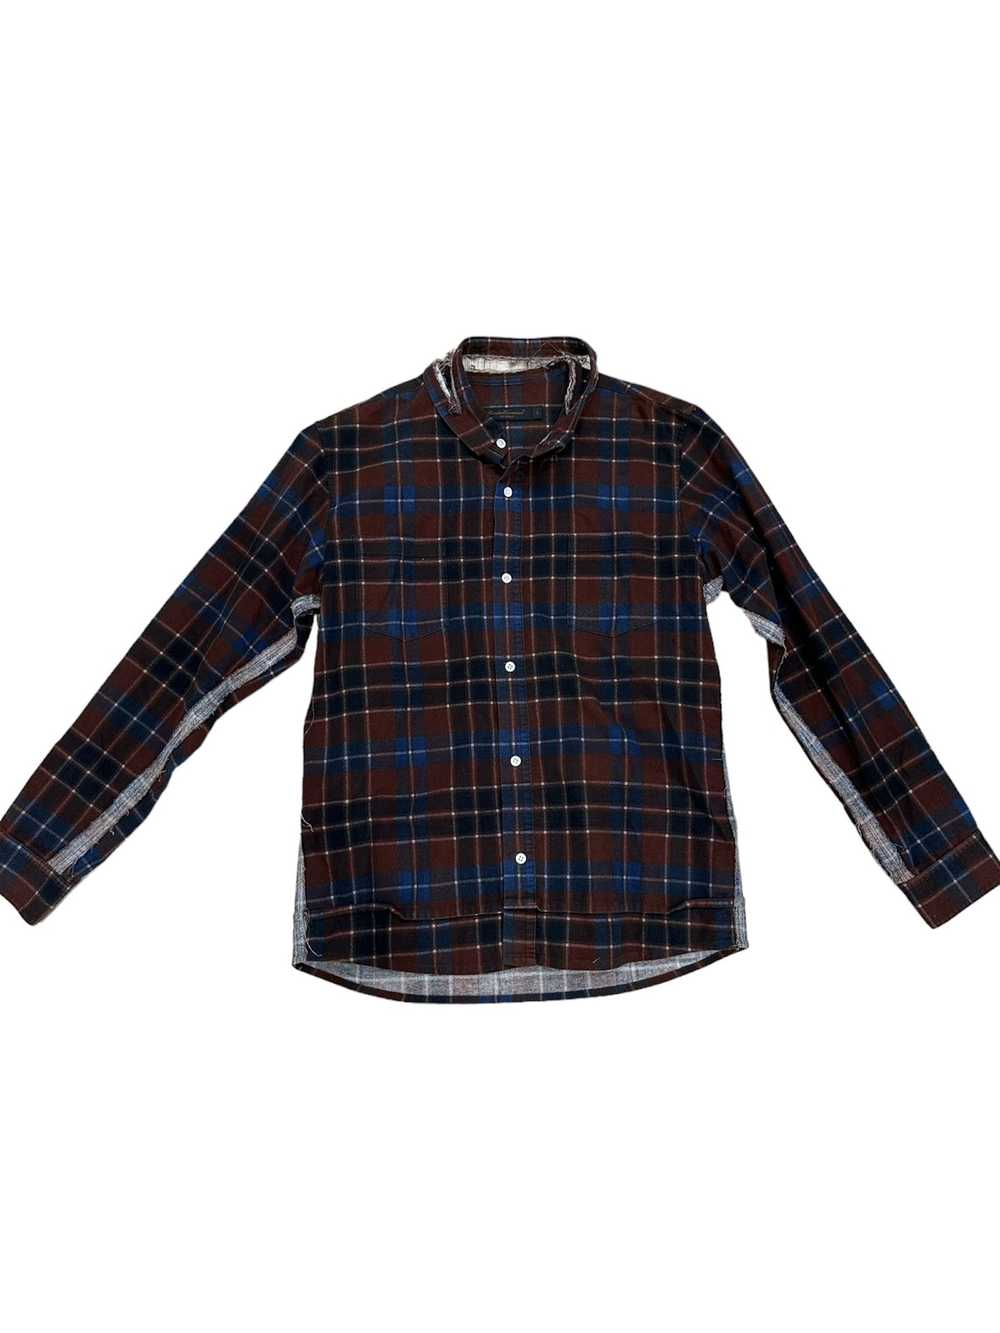 Undercover Undercover Scab Flannel - image 1